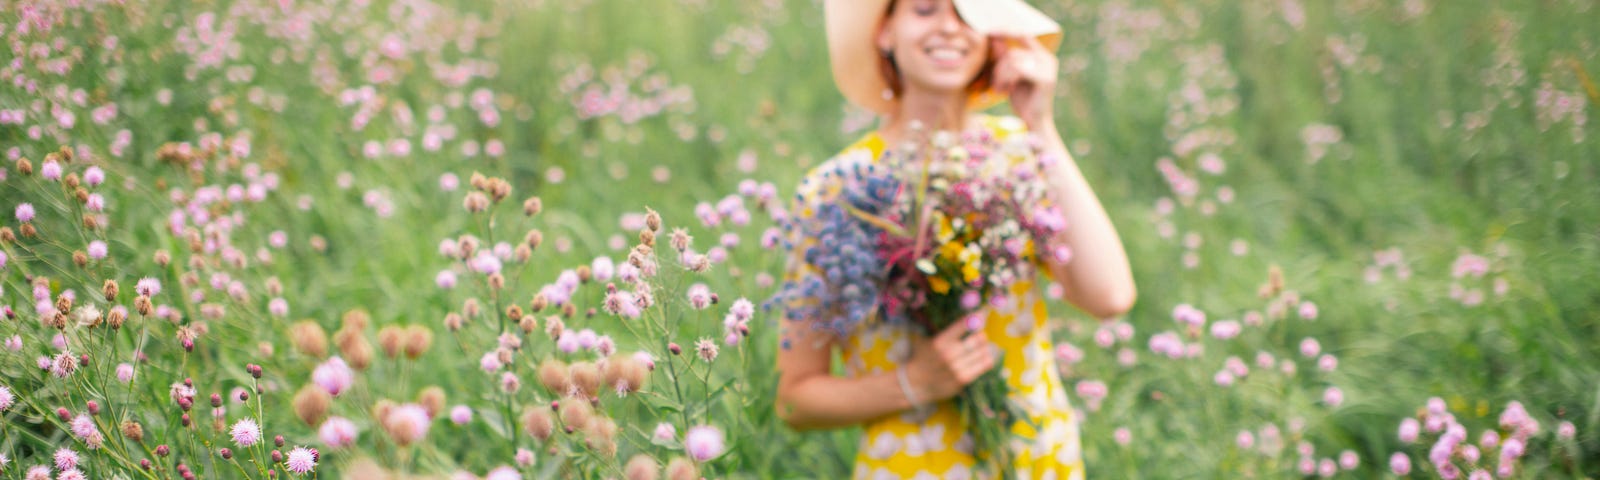 Out-of-focus girl in yellow and white floral dress standing on flower field during daytime holding a bunch of flowers.